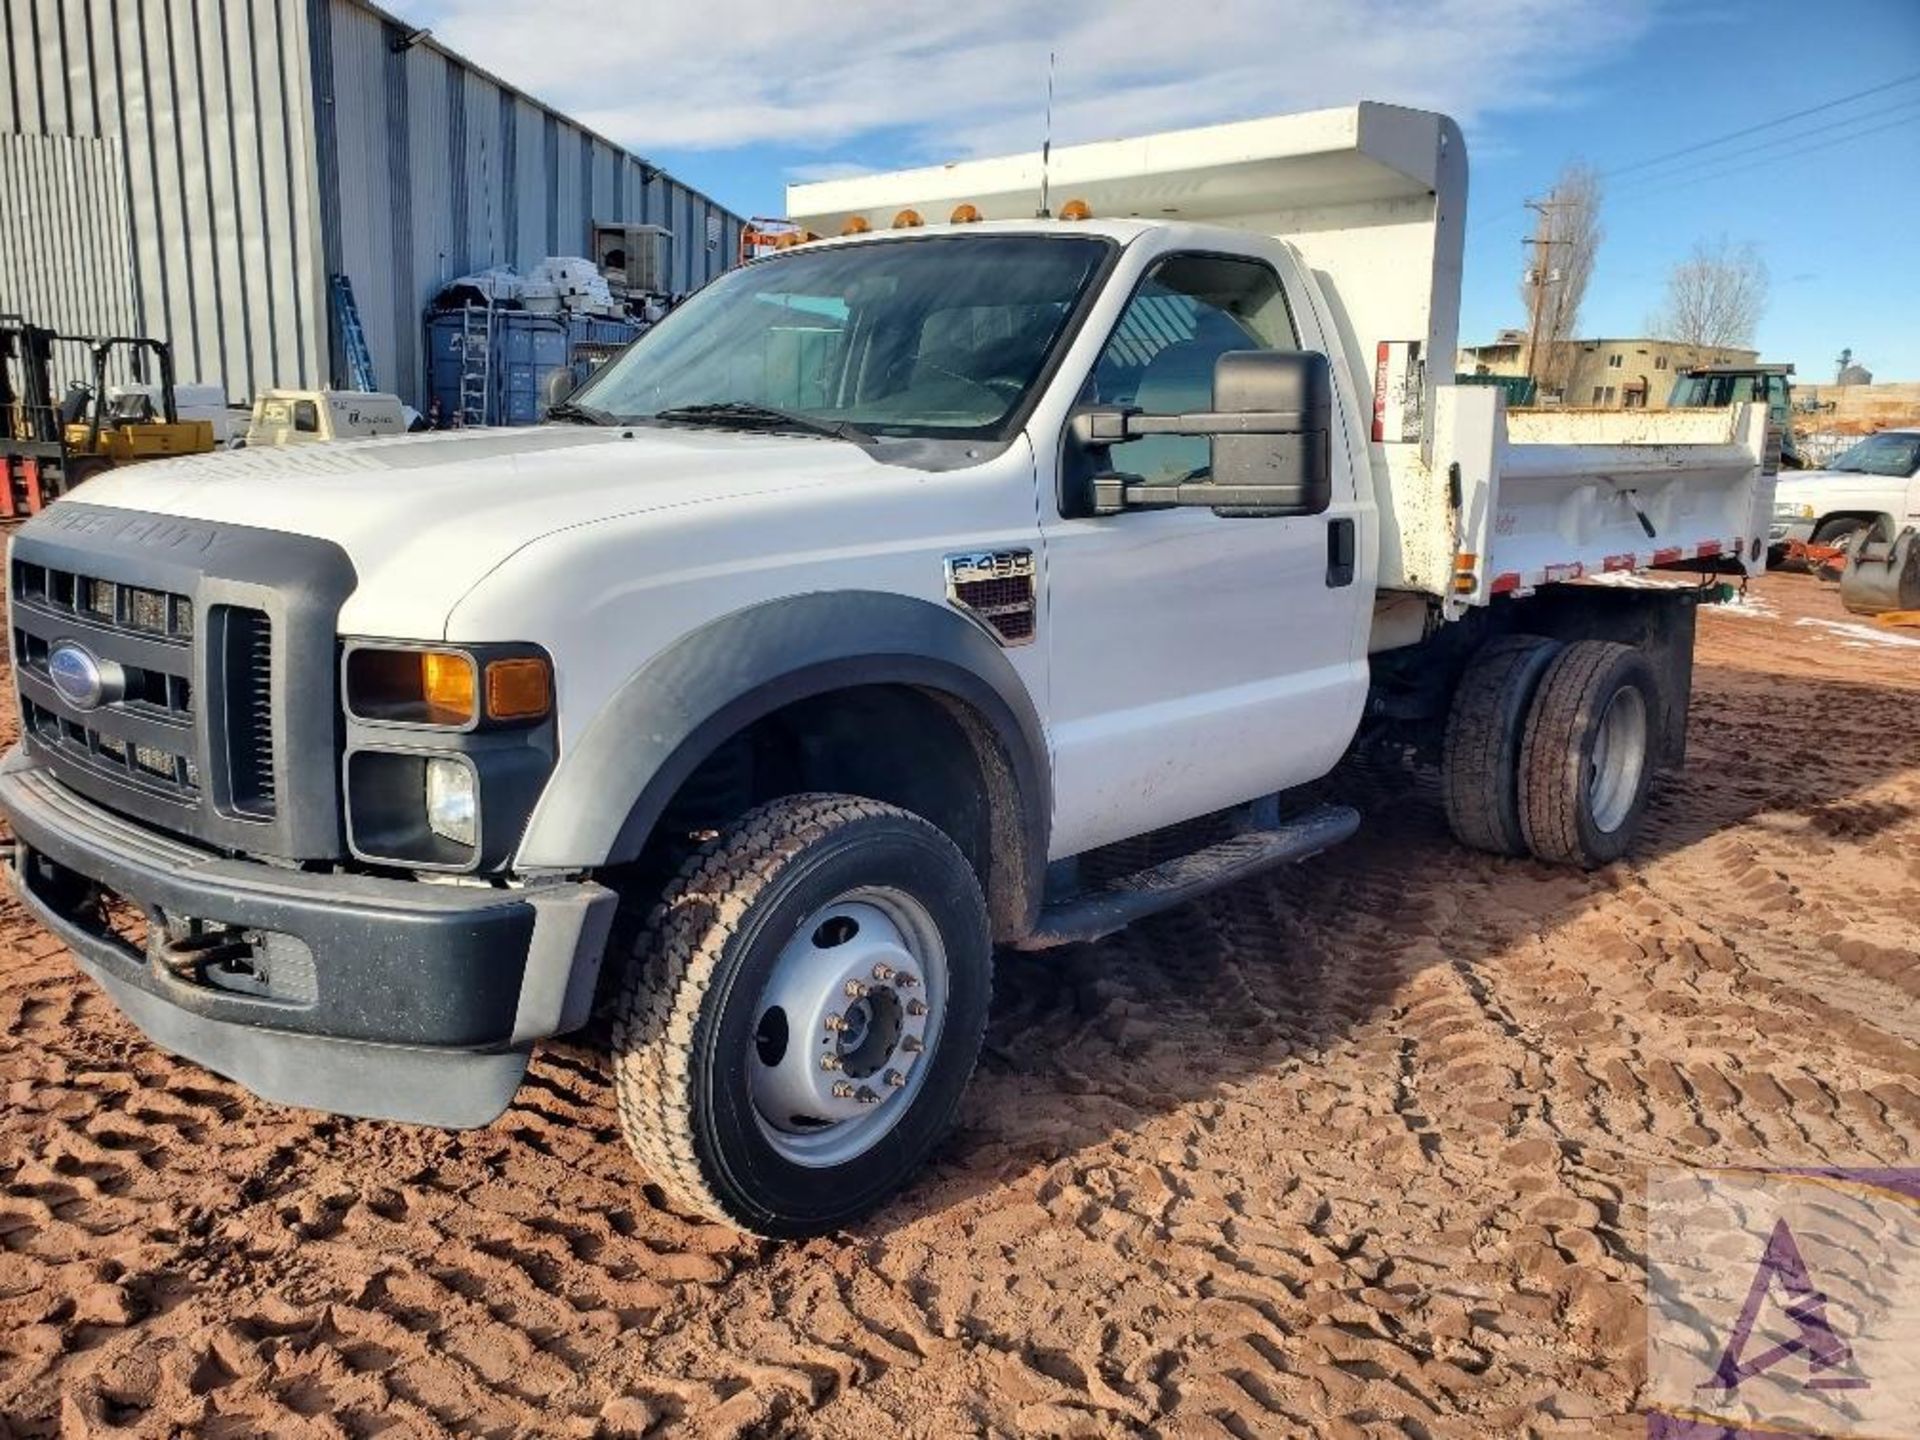 2008 Ford F-450 4X4 Dump Truck - Image 12 of 54